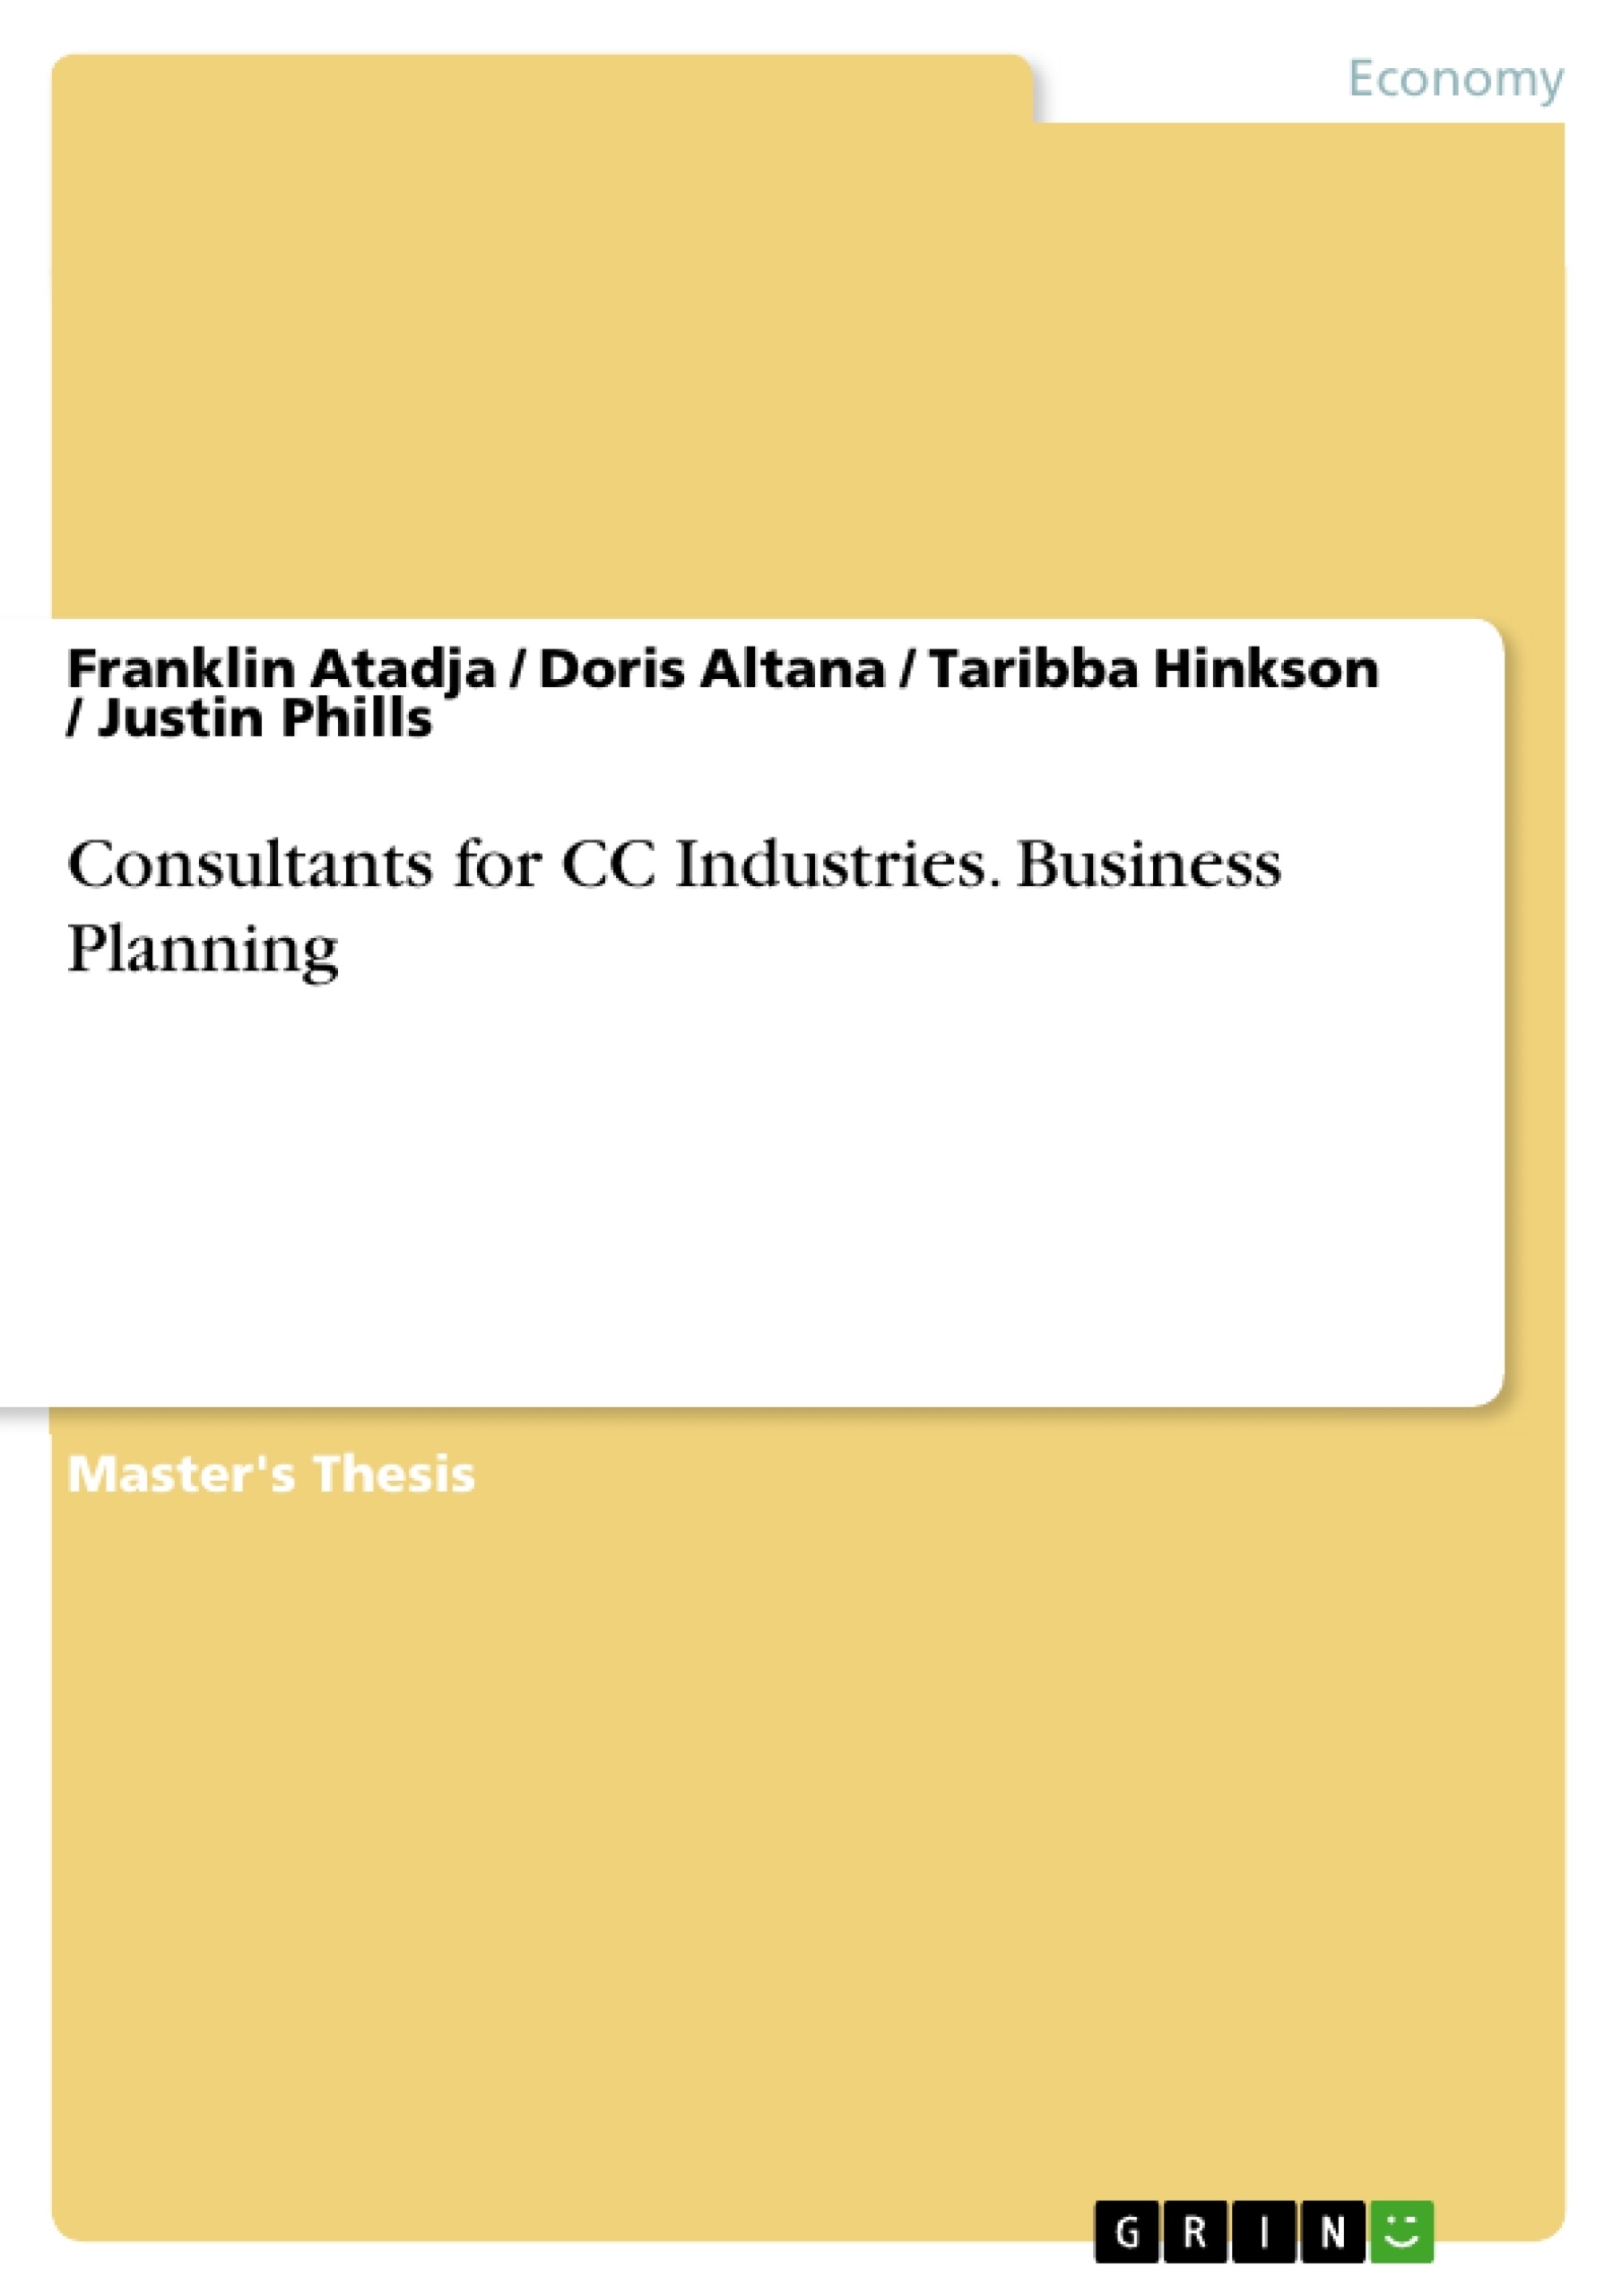 Title: Consultants for CC Industries. Business Planning